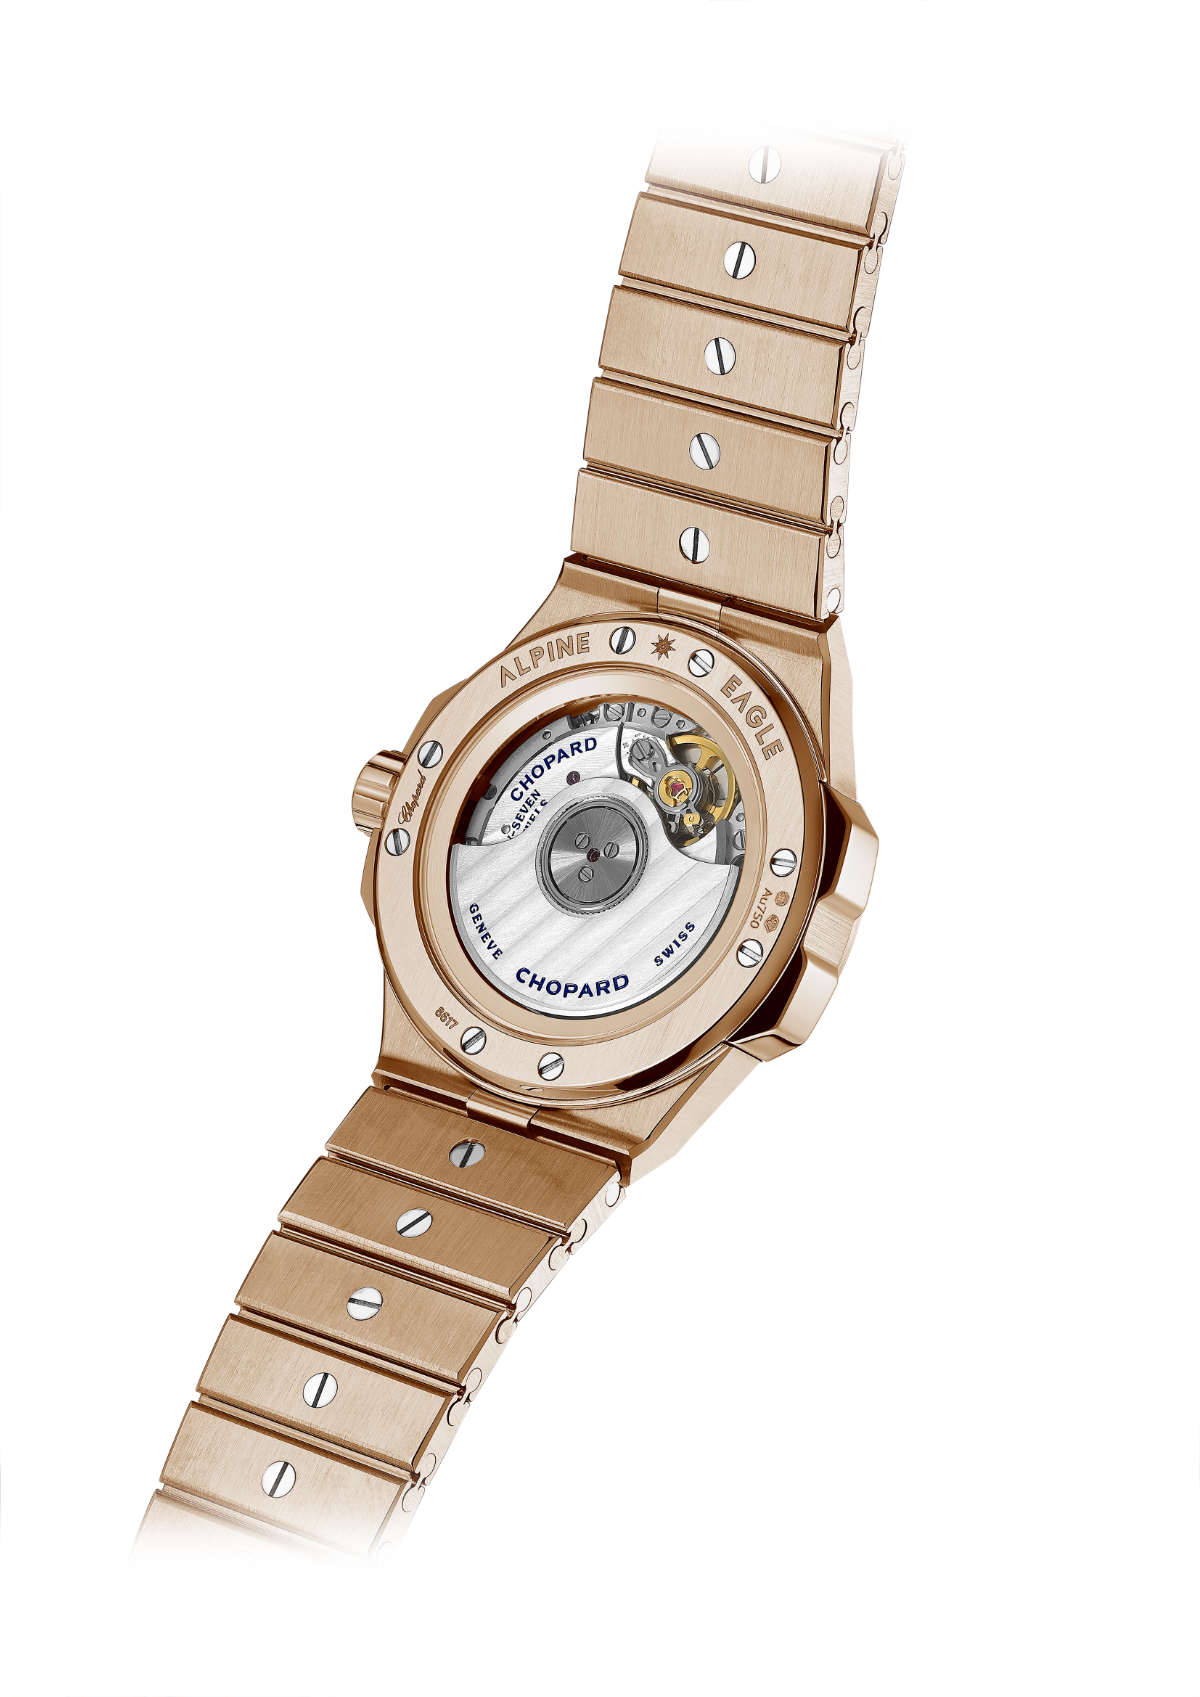 Alpine Eagle 33: Chopard’s Emblematic Sporty-chic Watch Revisited In A New 33 Mm Case Size